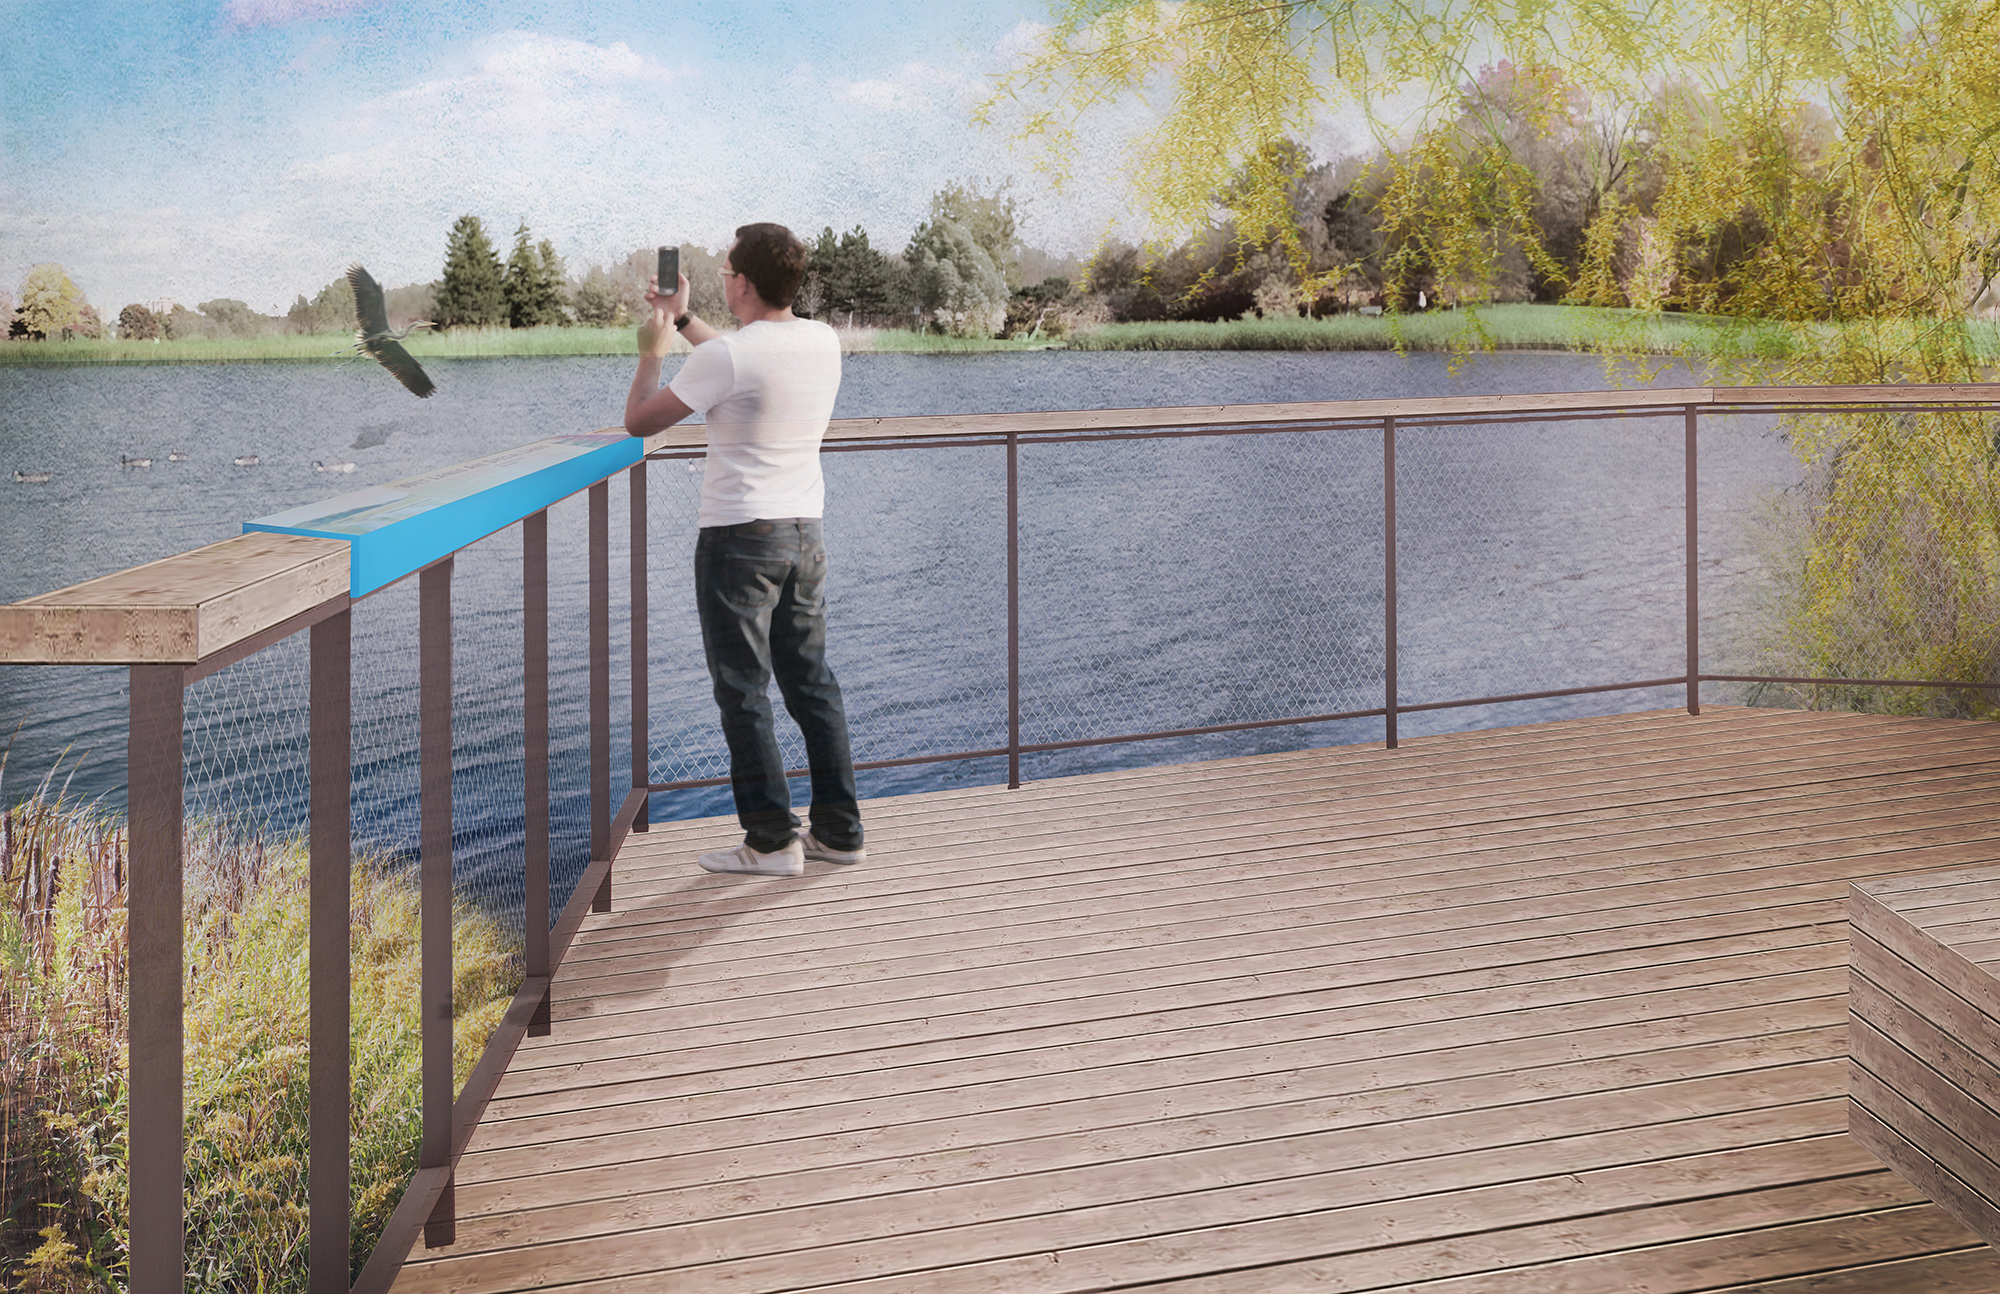 This view demonstrates what a lookout deck could look like. Shown is a wooden deck overlooking the pond with signage integrated into the guardrail.